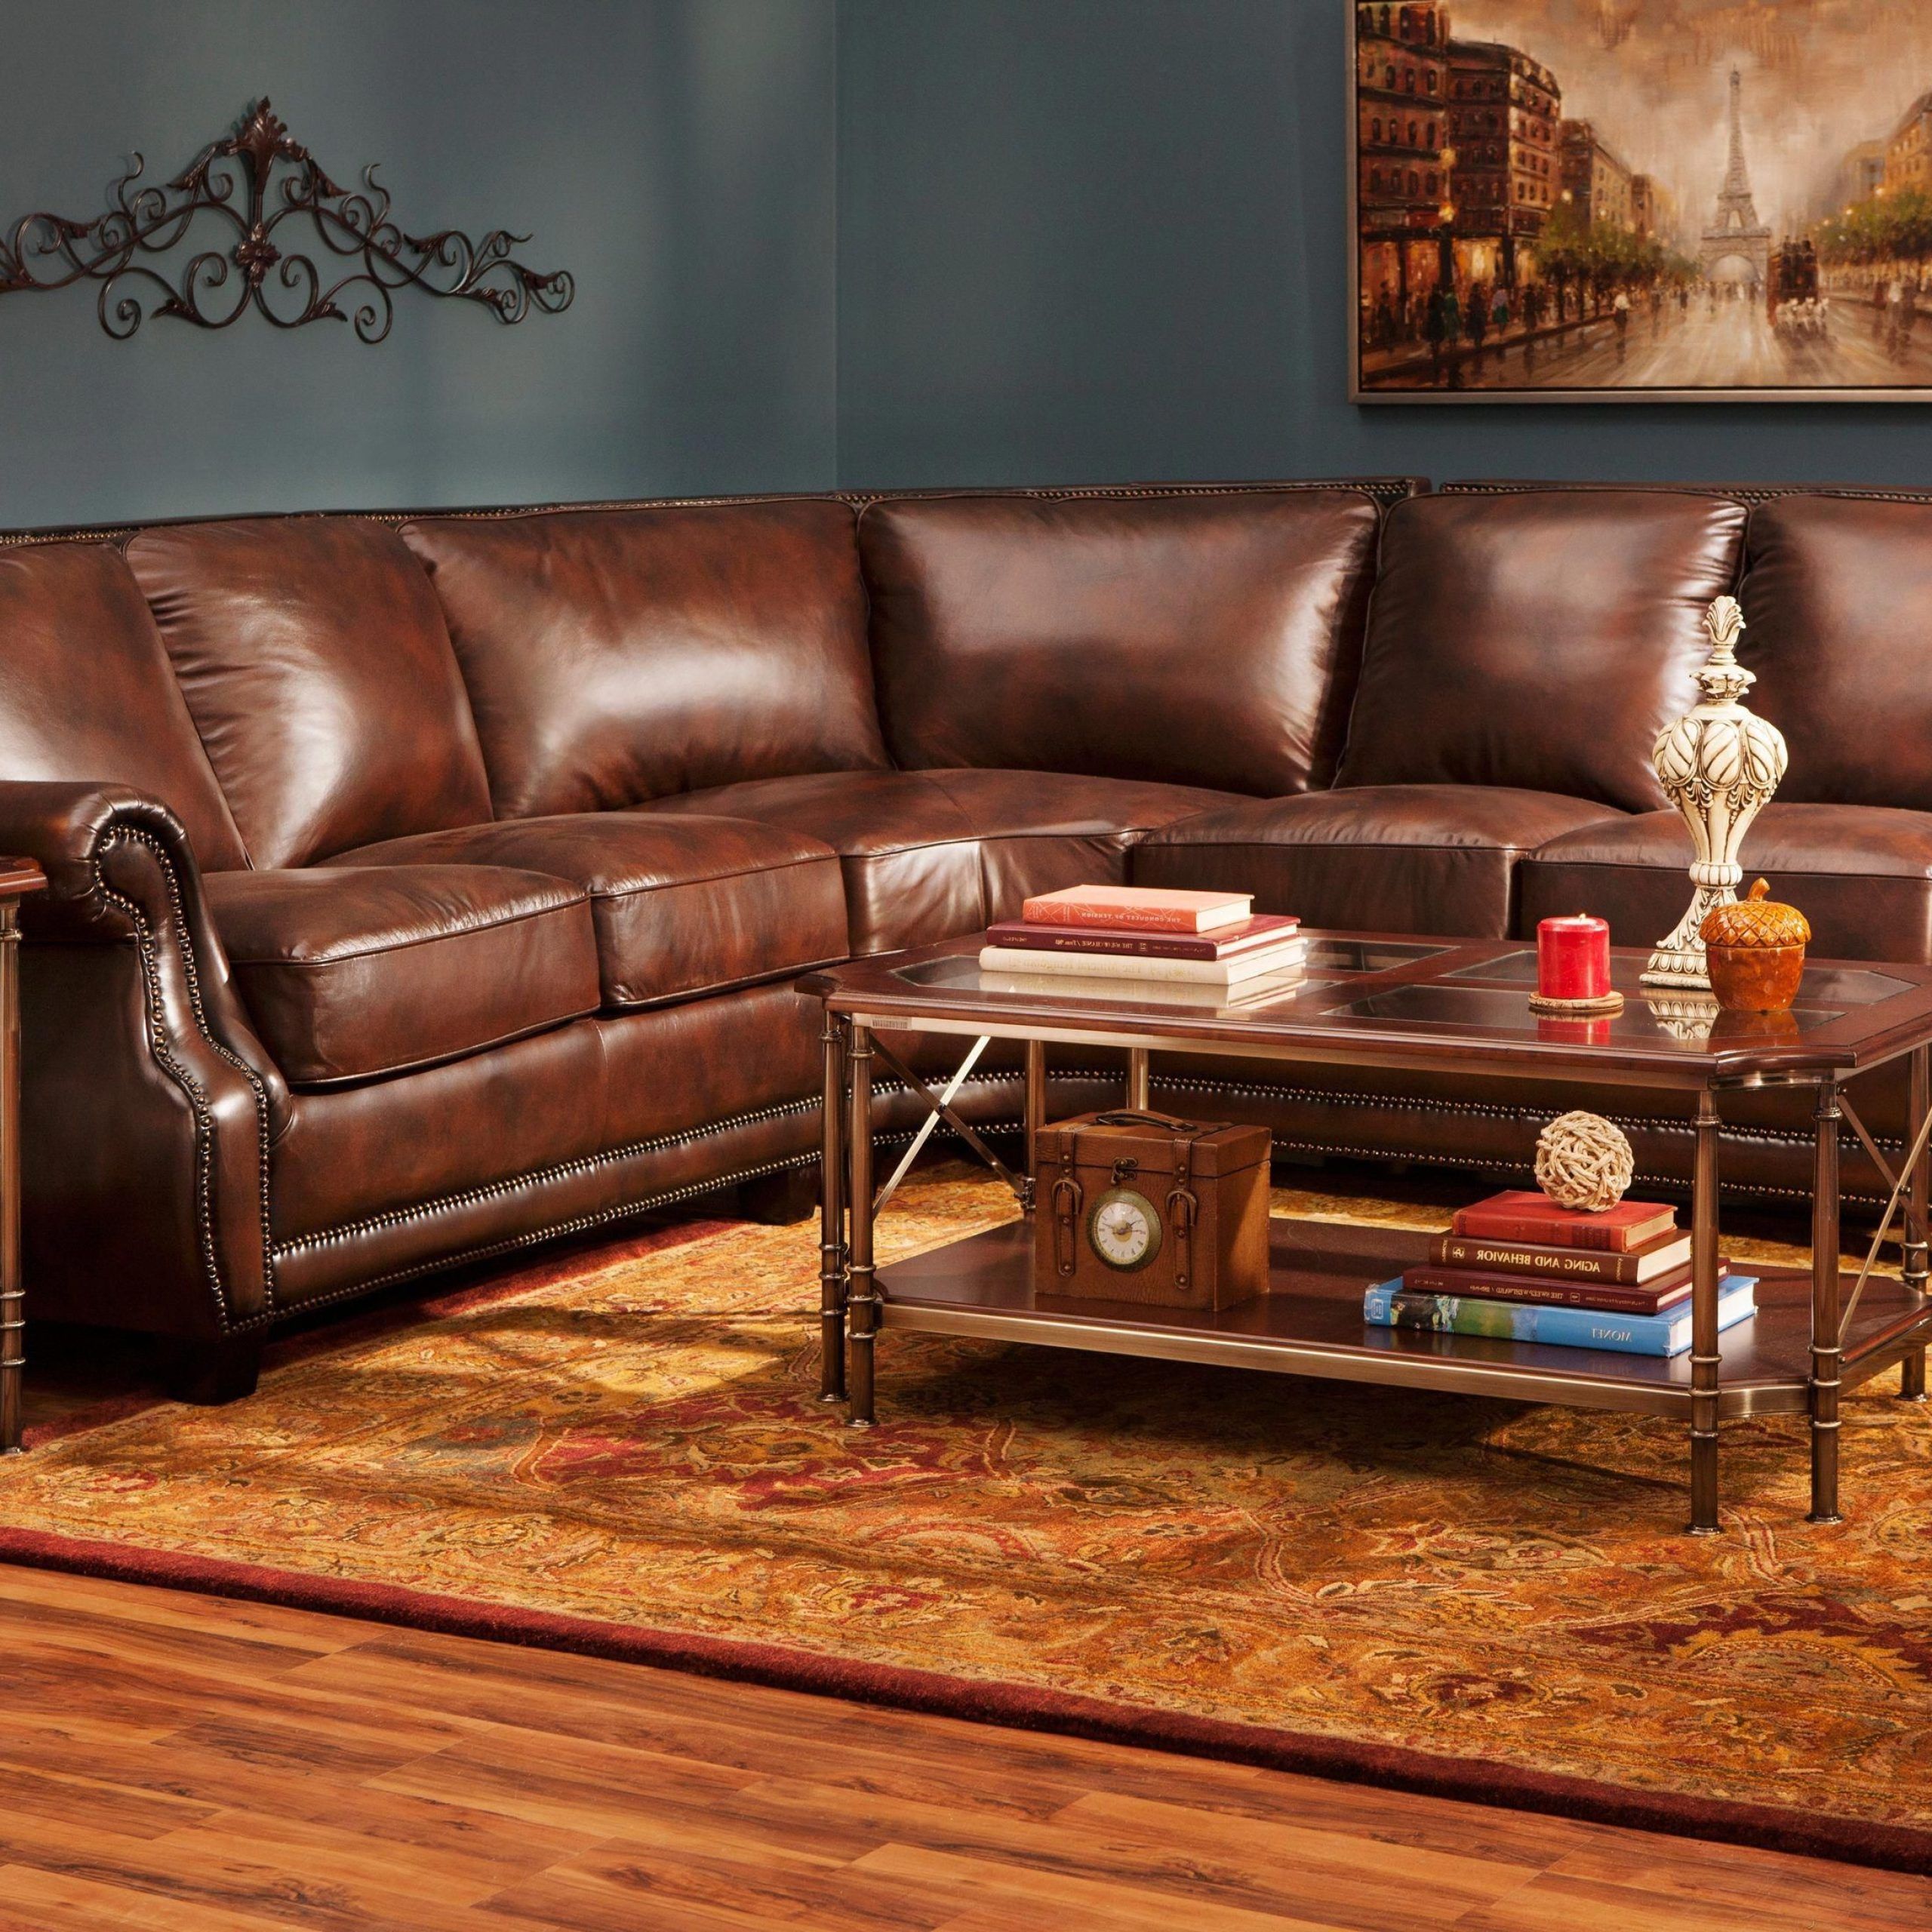 Taking Its Cues From The Classics, This Romano 3 Piece Leather Intended For 3 Piece Leather Sectional Sofa Sets (View 15 of 20)